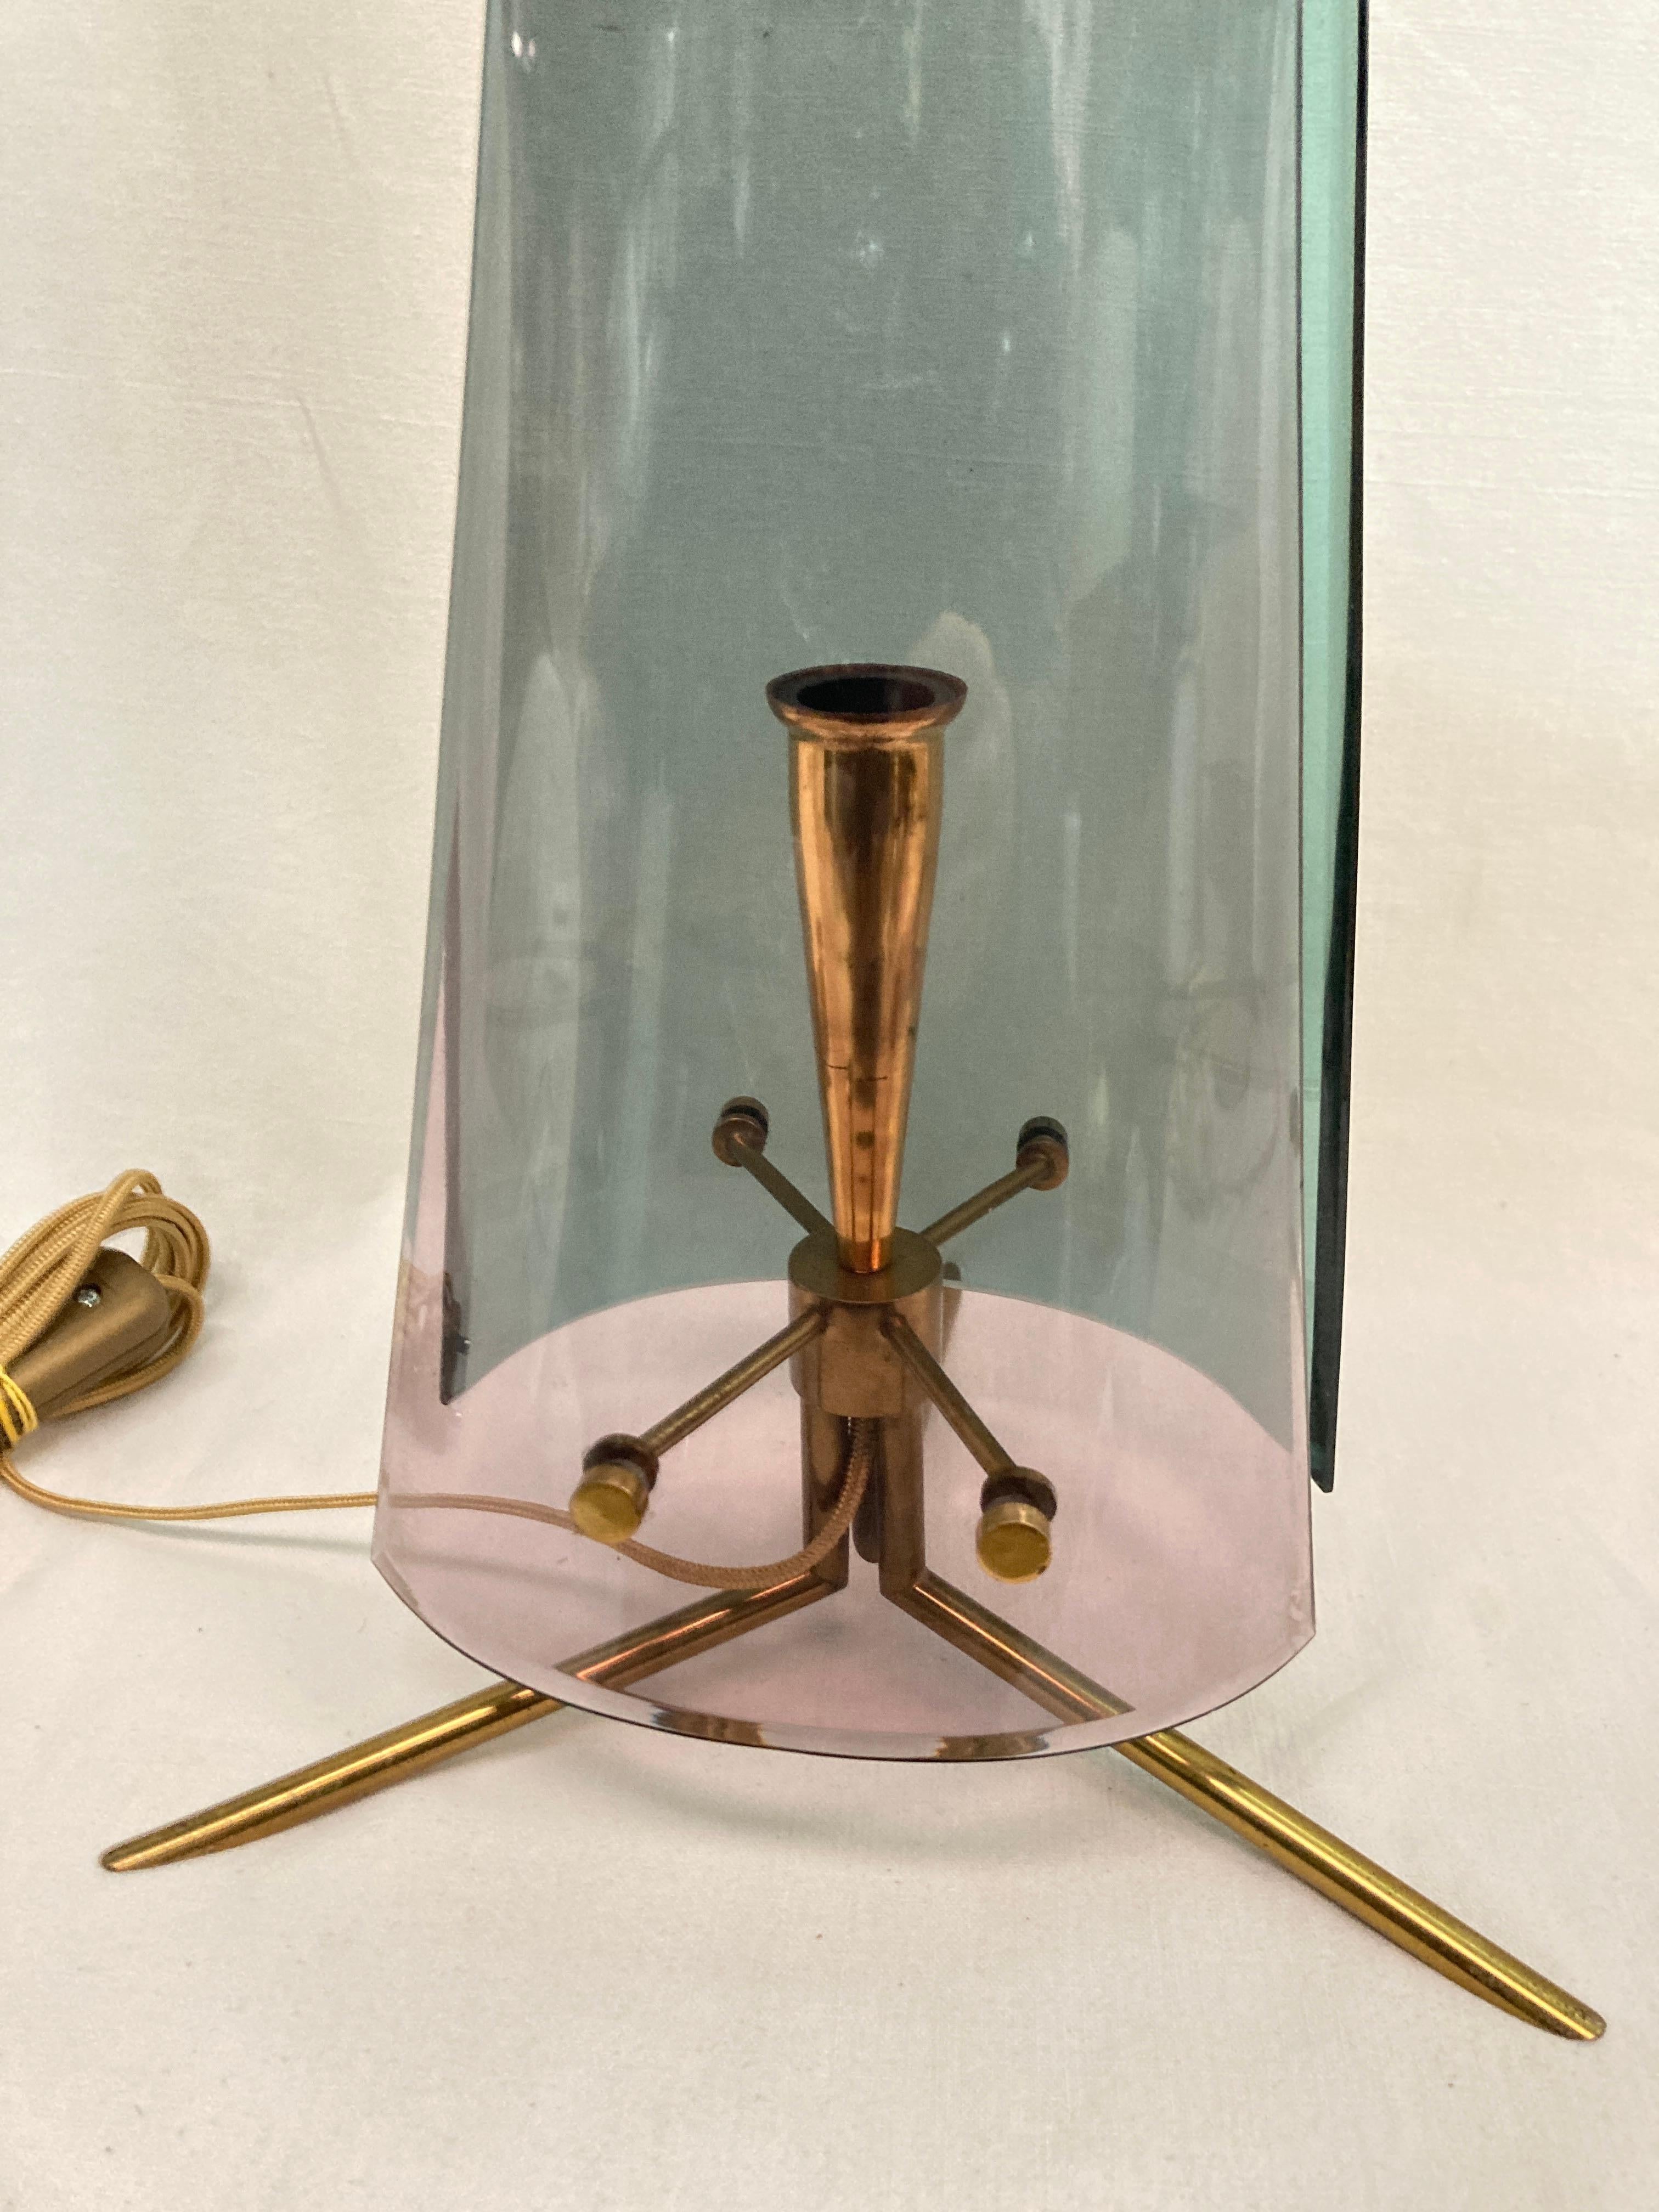 1960's plexiglass and brass table lamp in the style of Fontana Arte
Great design
Good quality
Great condition